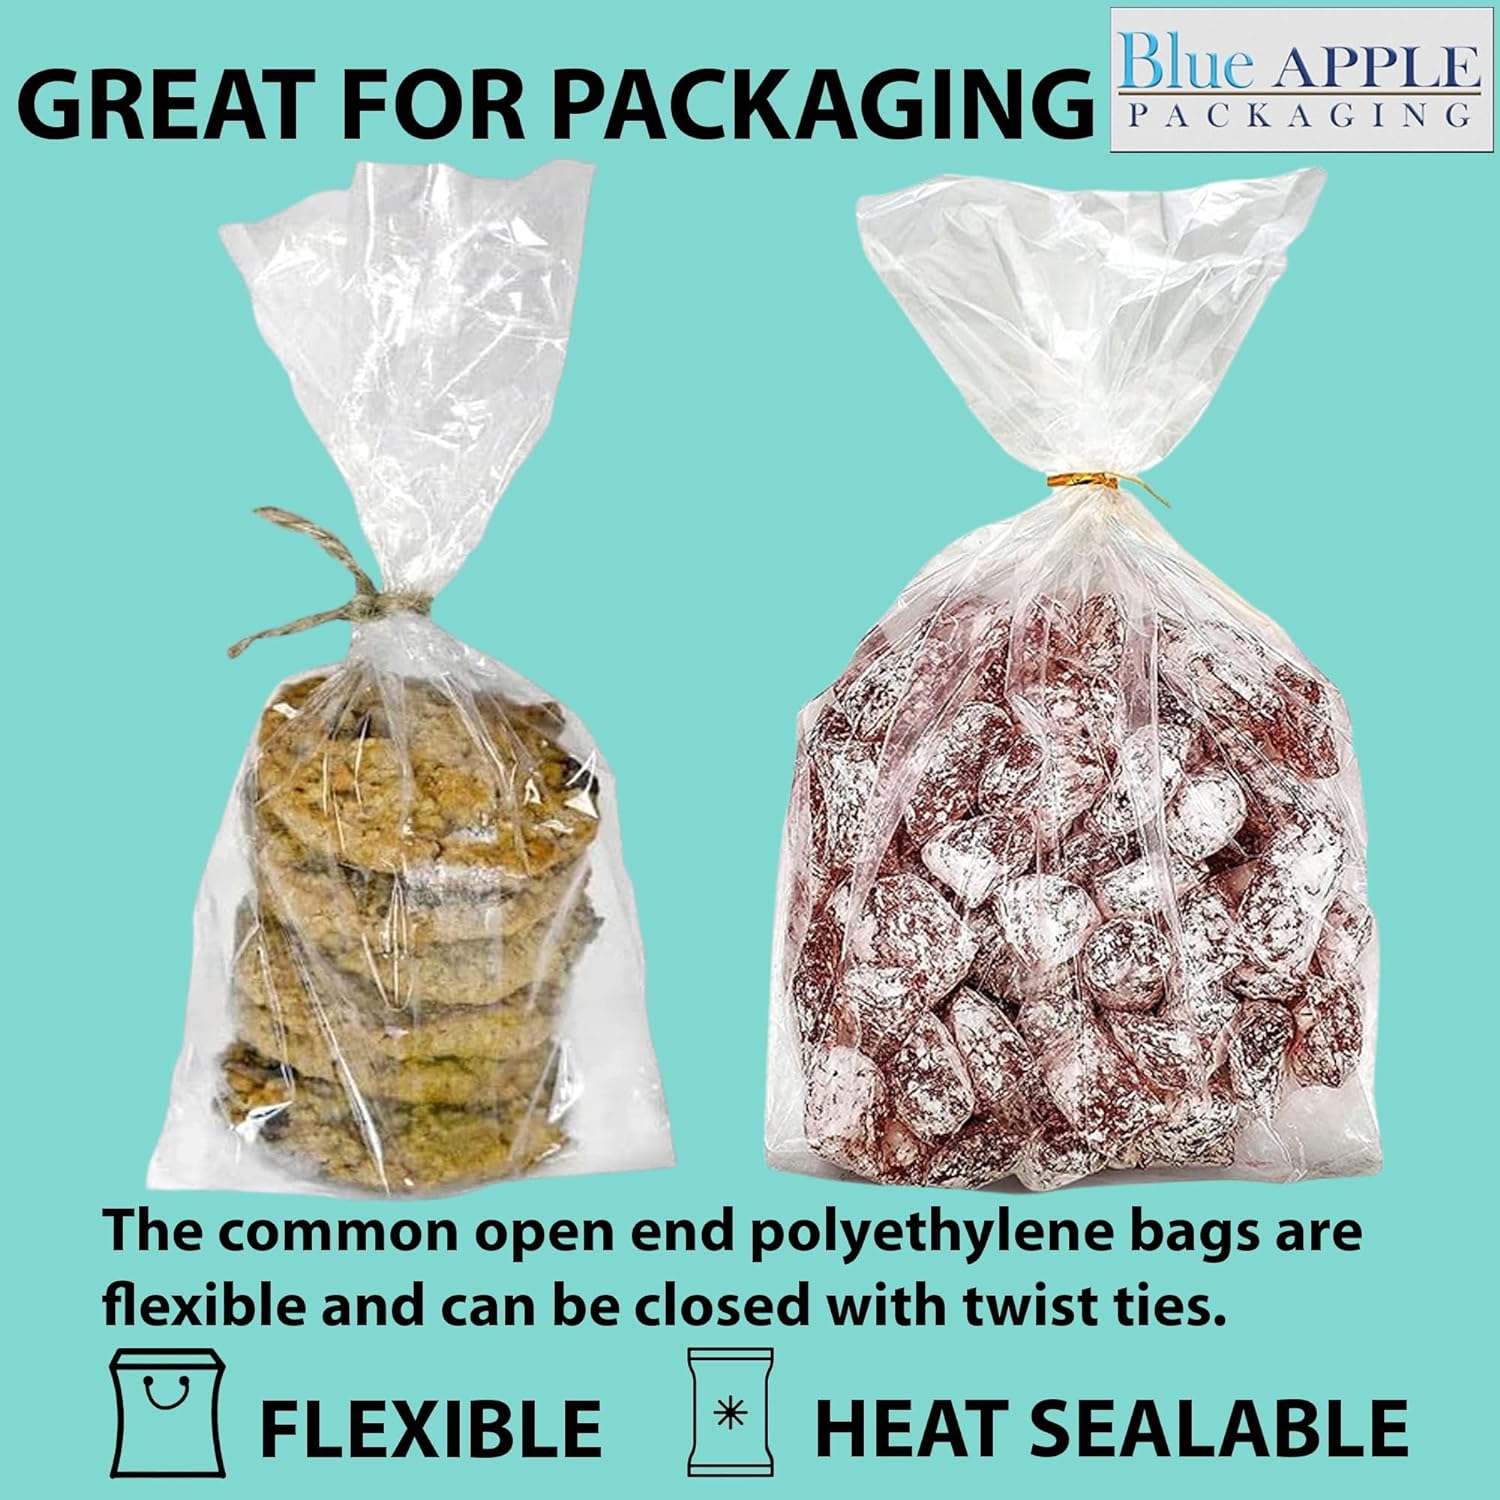 Clear Gusseted Poly bags 1 Mil, 5.5 inch X 4.75 inch X 22 inch